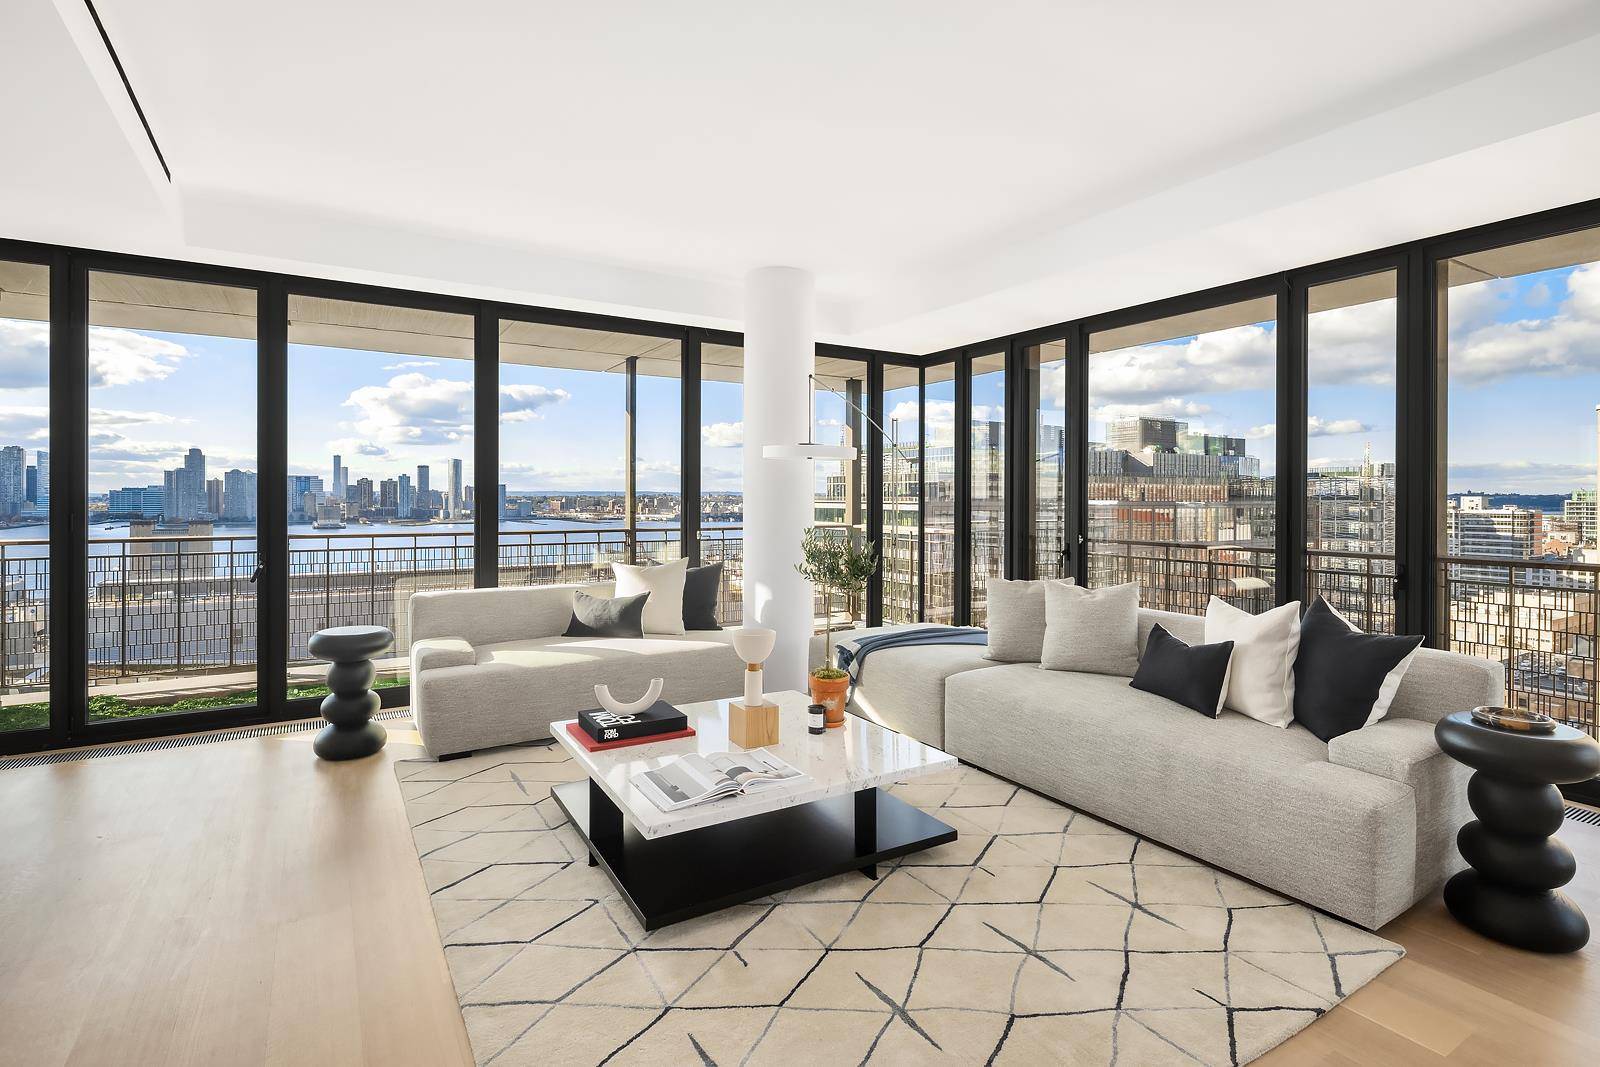 Emerging as a rare vertical sight in historic Hudson Square, the 25 story 100 Vandam, designed by the pioneering COOKFOX Architects, effortlessly melds the old and the new with its ...